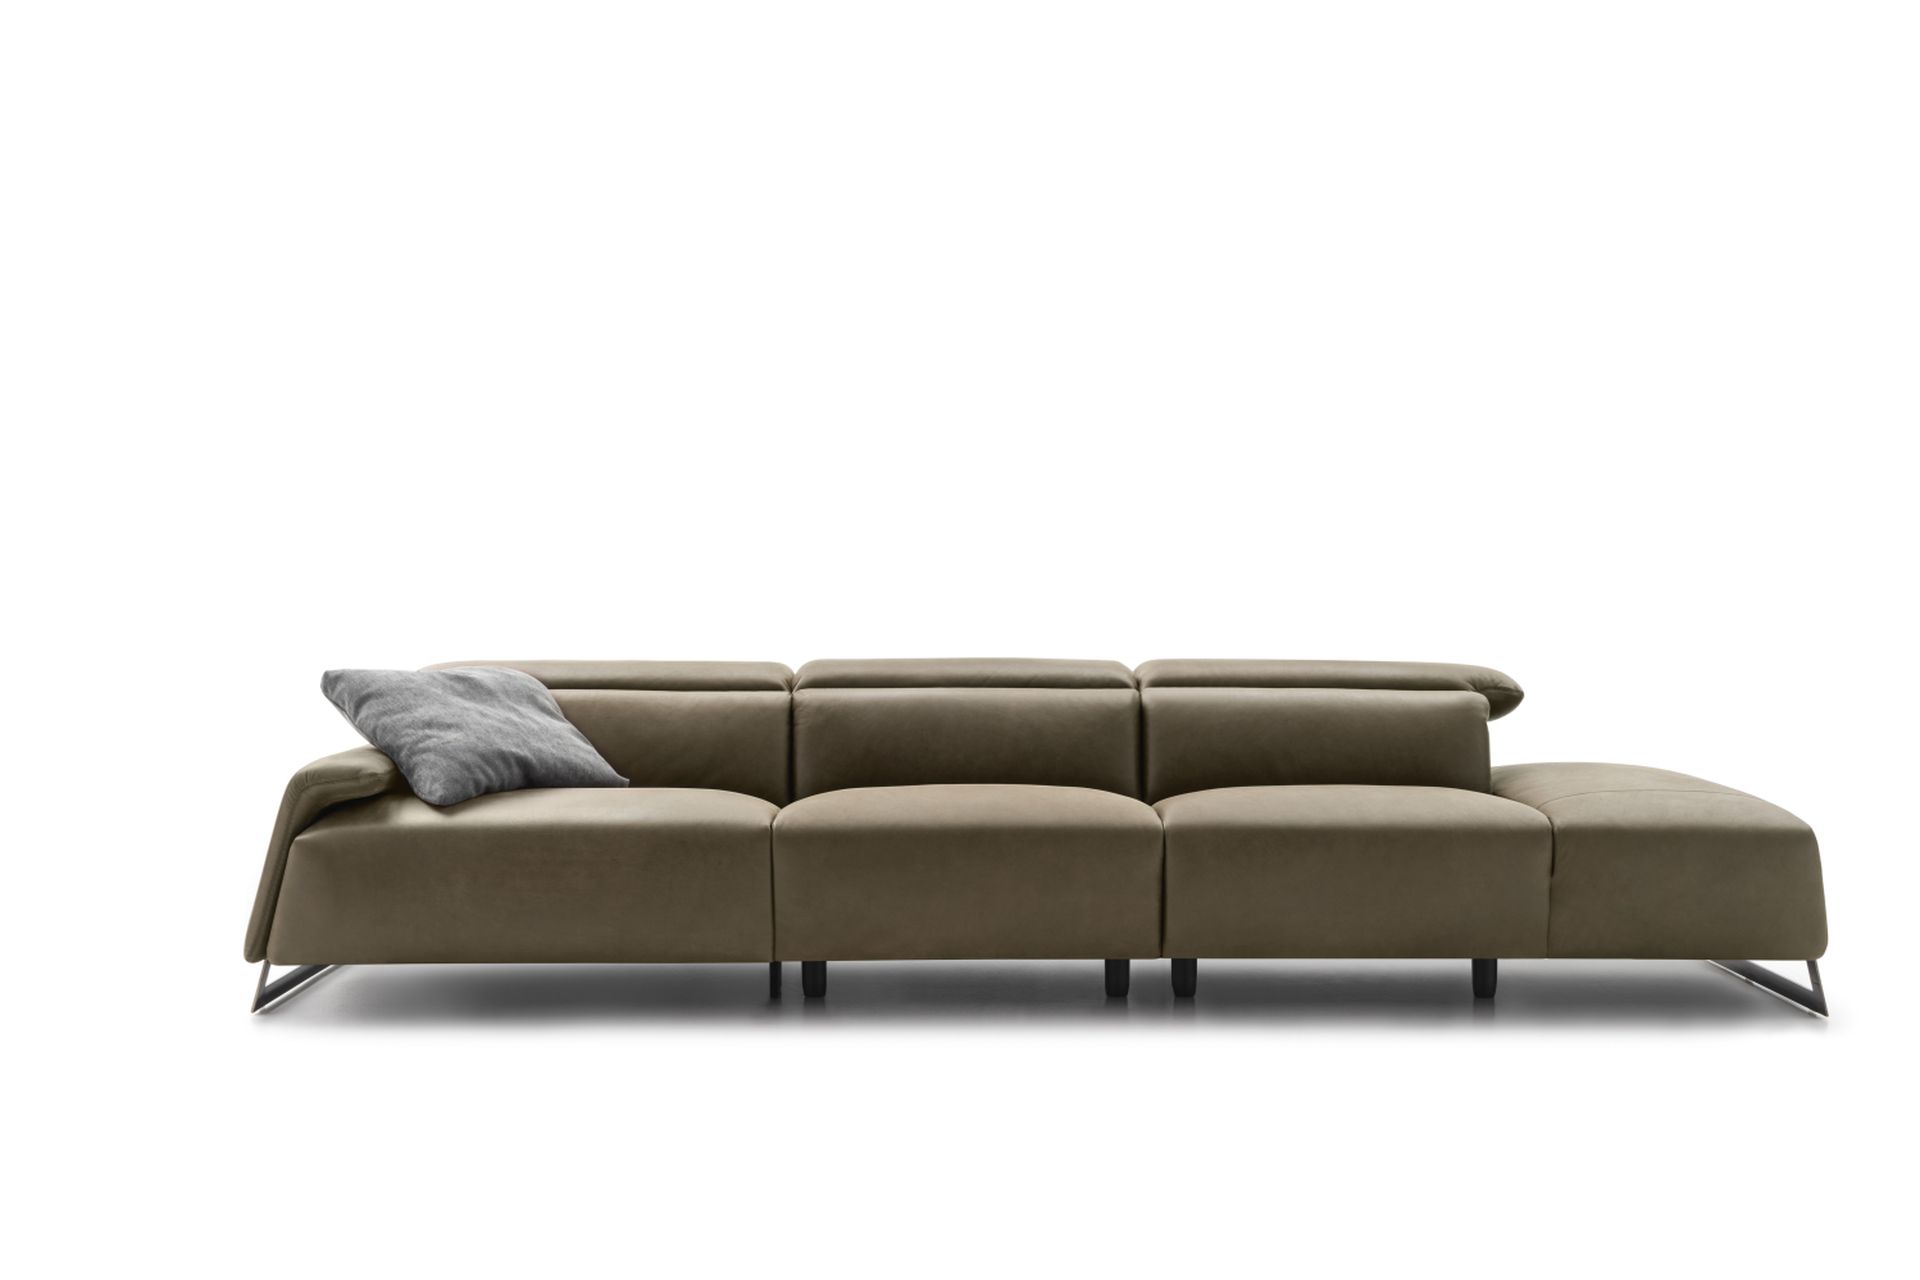 Canaletto_ambient_living_sofa_sectional_loveseat_parnian_furniture